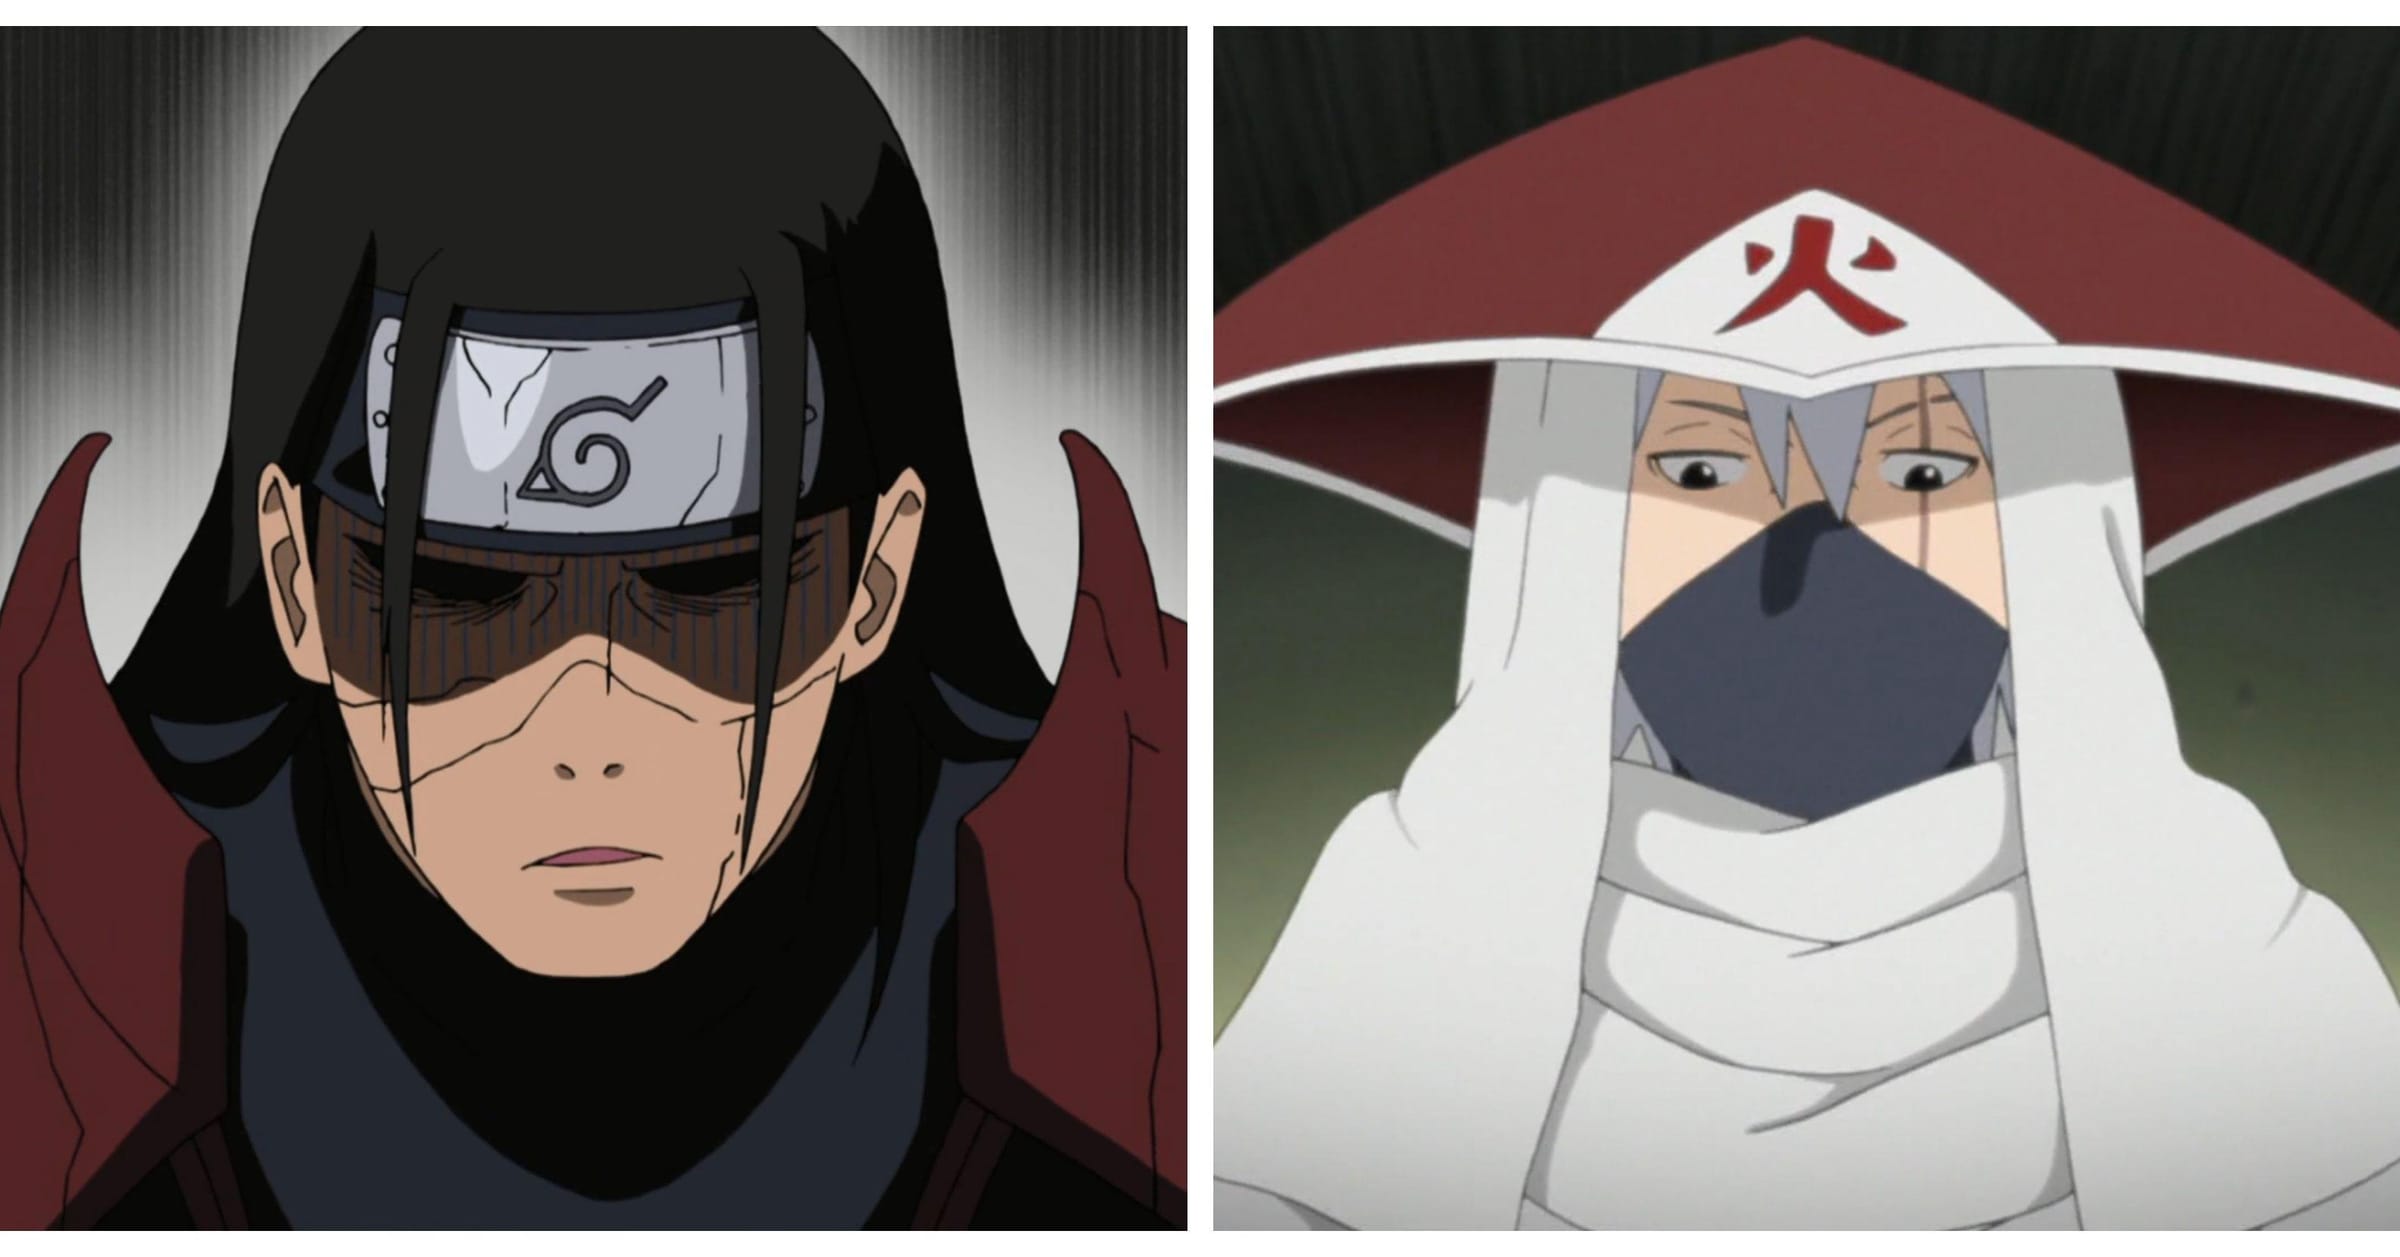 Ranking Every Kage In Naruto From Strongest to Weakest